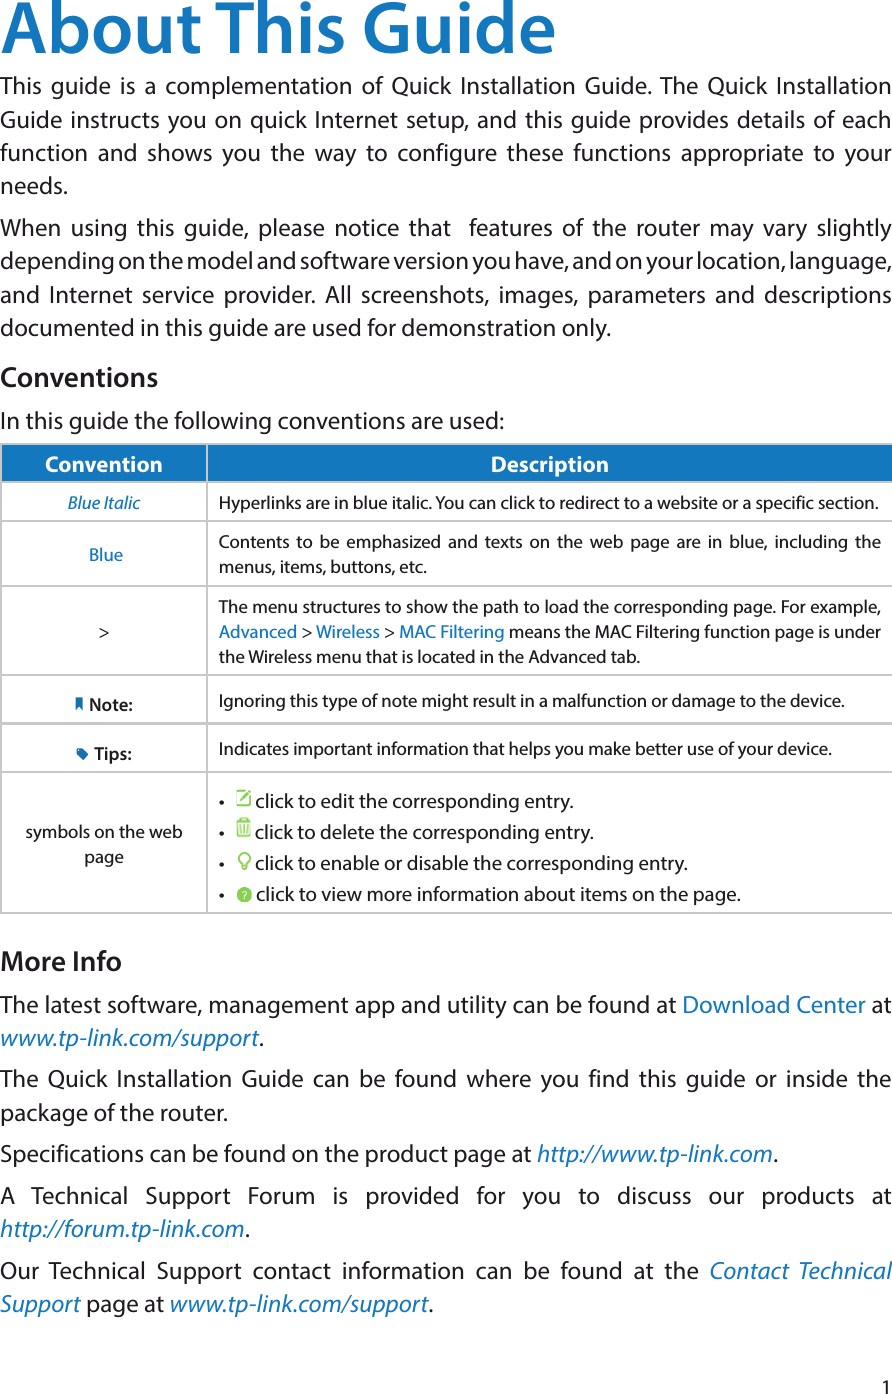 1About This GuideThis guide is a complementation of Quick Installation Guide. The Quick Installation Guide instructs you on quick Internet setup, and this guide provides details of each function and shows you the way to configure these functions appropriate to your needs. When using this guide, please notice that  features of the router may vary slightly depending on the model and software version you have, and on your location, language, and Internet service provider. All screenshots, images, parameters and descriptions documented in this guide are used for demonstration only.ConventionsIn this guide the following conventions are used:Convention DescriptionBlue Italic Hyperlinks are in blue italic. You can click to redirect to a website or a specific section. Blue Contents to be emphasized and texts on the web page are in blue, including the menus, items, buttons, etc.&gt;The menu structures to show the path to load the corresponding page. For example, Advanced &gt; Wireless &gt; MAC Filtering means the MAC Filtering function page is under the Wireless menu that is located in the Advanced tab.Note: Ignoring this type of note might result in a malfunction or damage to the device.Tips: Indicates important information that helps you make better use of your device.symbols on the web page•   click to edit the corresponding entry.•   click to delete the corresponding entry.•   click to enable or disable the corresponding entry.•   click to view more information about items on the page.More InfoThe latest software, management app and utility can be found at Download Center at www.tp-link.com/support.The Quick Installation Guide can be found where you find this guide or inside the package of the router.Specifications can be found on the product page at http://www.tp-link.com.A Technical Support Forum is provided for you to discuss our products at  http://forum.tp-link.com.Our Technical Support contact information can be found at the Contact Technical Support page at www.tp-link.com/support.